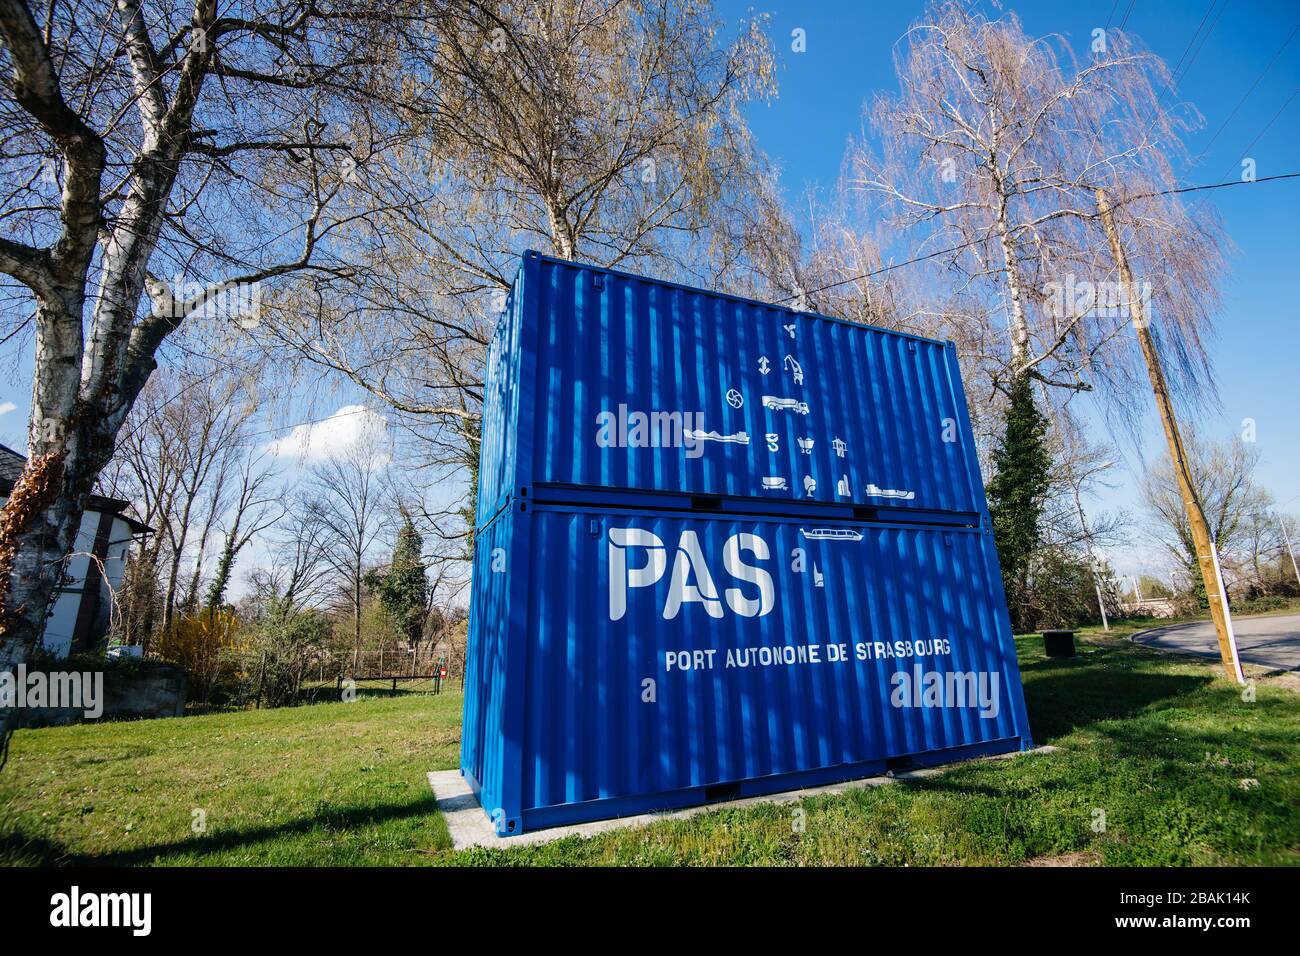 Strasbourg, France - Mar 18, 2020: Cargo containers painted in blue color and PAS signage from Port Autonome de Strasbourg Free Port near Robertsau neighborhood entrance Stock Photo